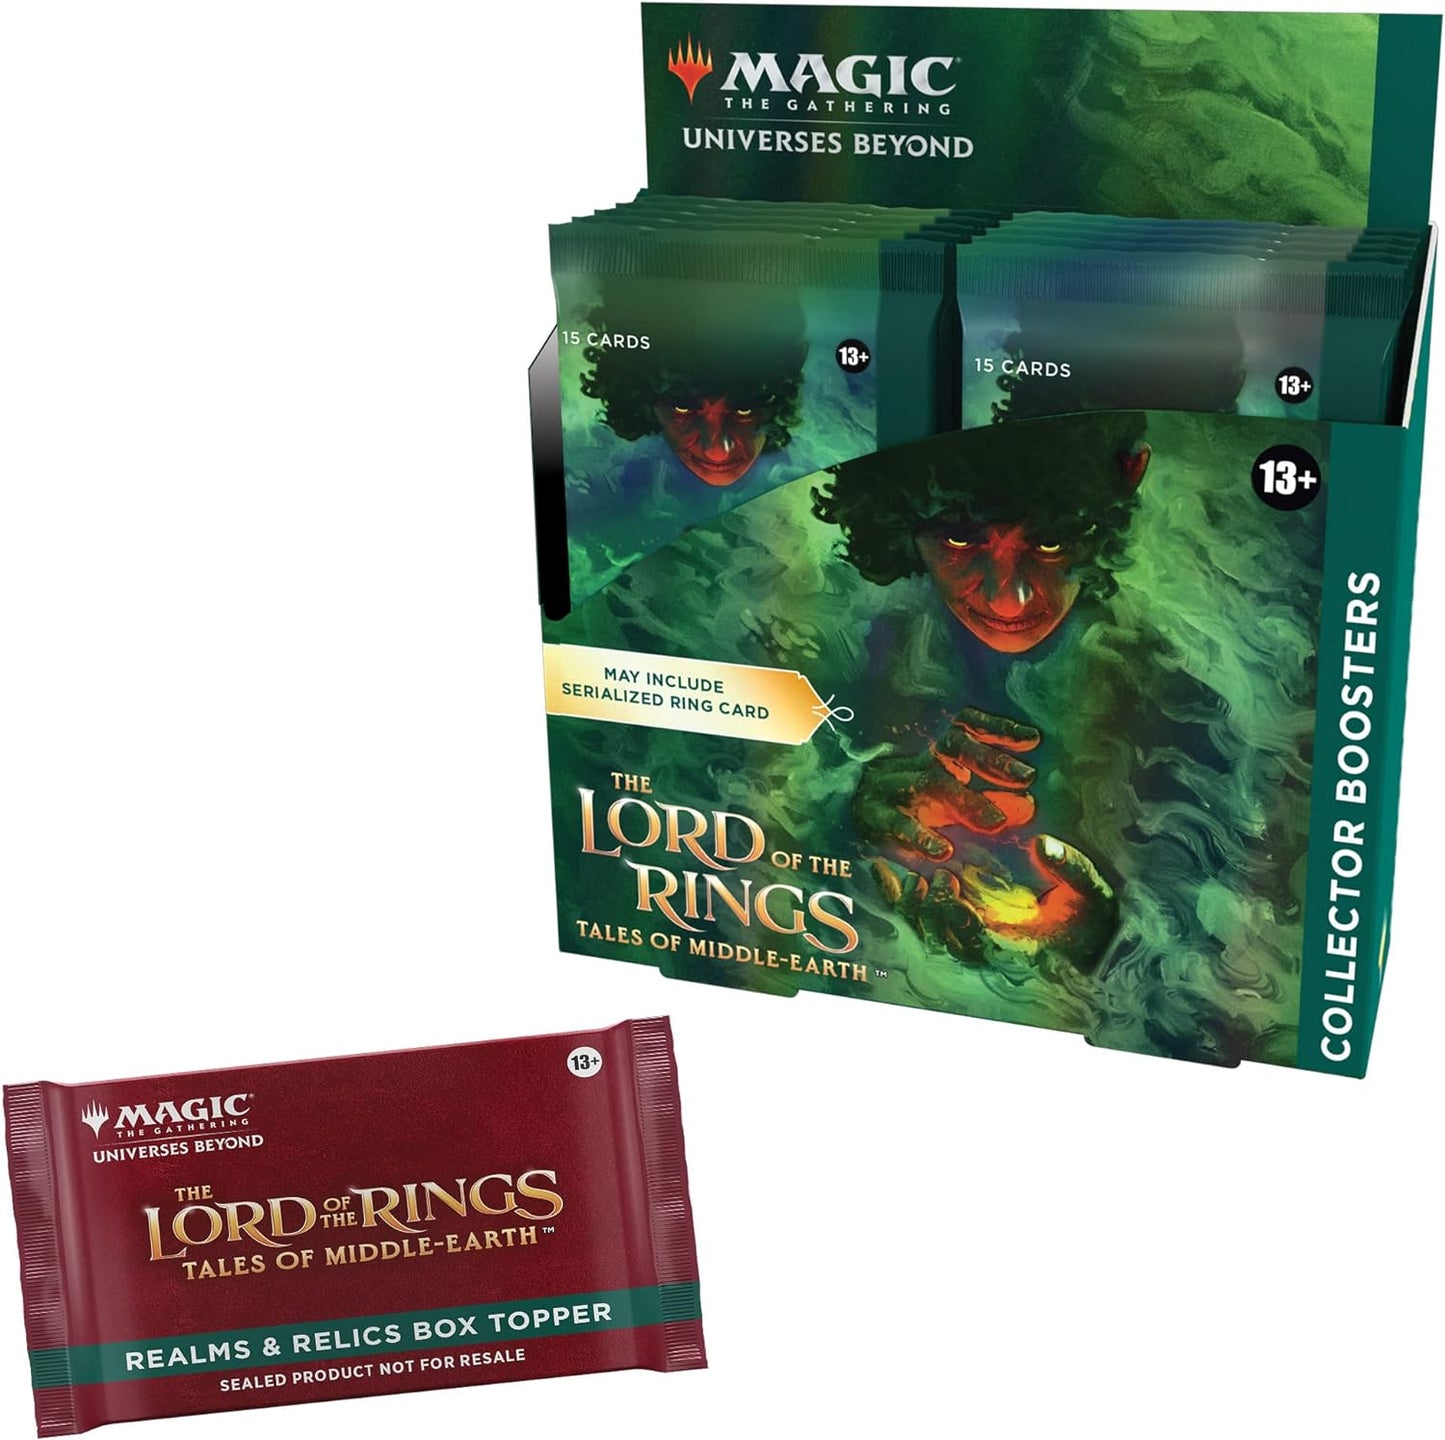 Magic the Gathering - Boite de 12 Boosters Collector - The Lord of the Rings - Tales of Middle-Earth en Anglais - Neuf scellé